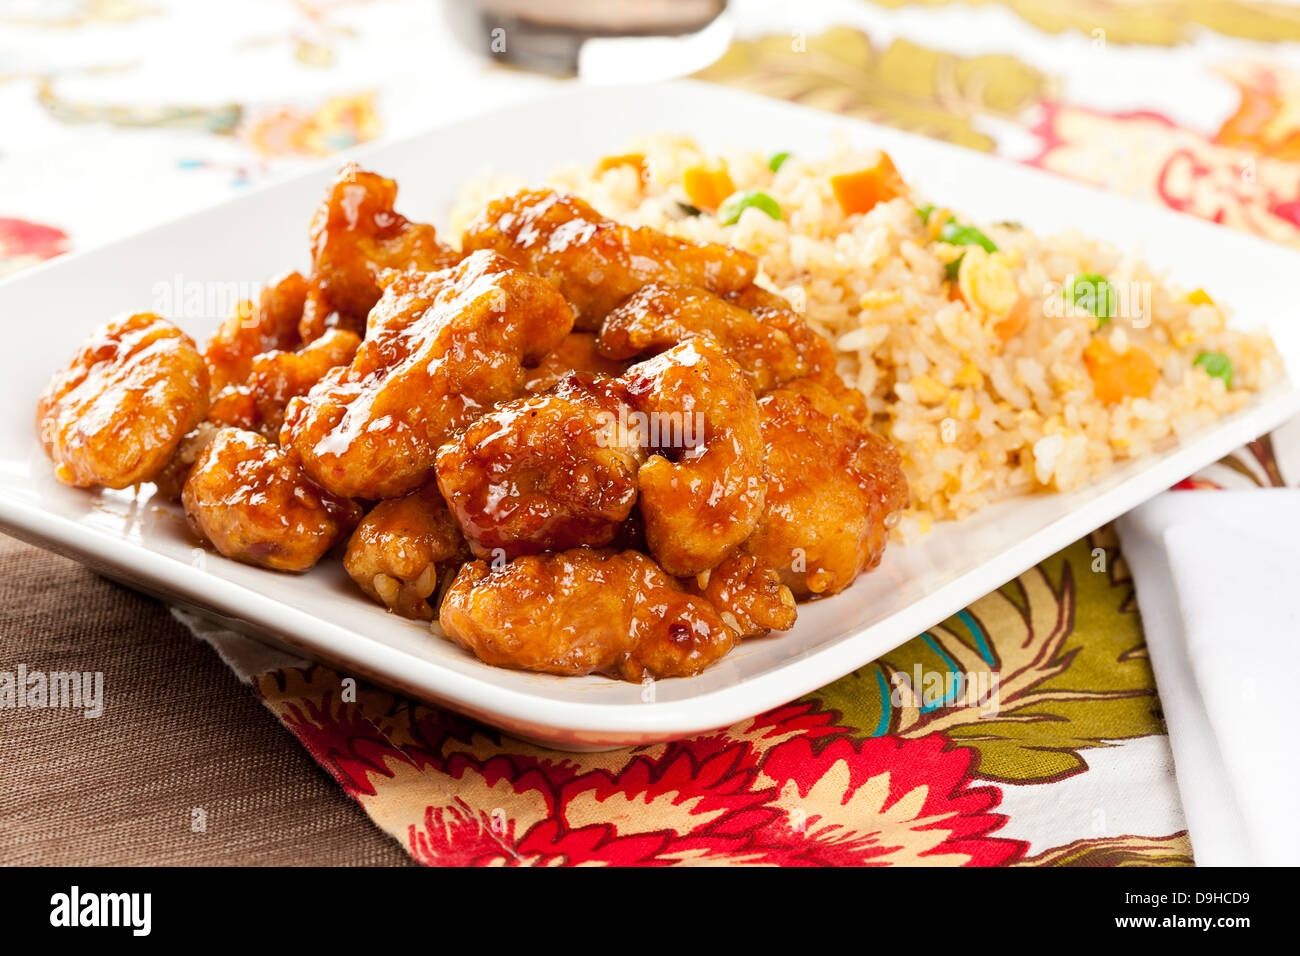 Homemade Orange Chicken with Rice on a background Stock Photo